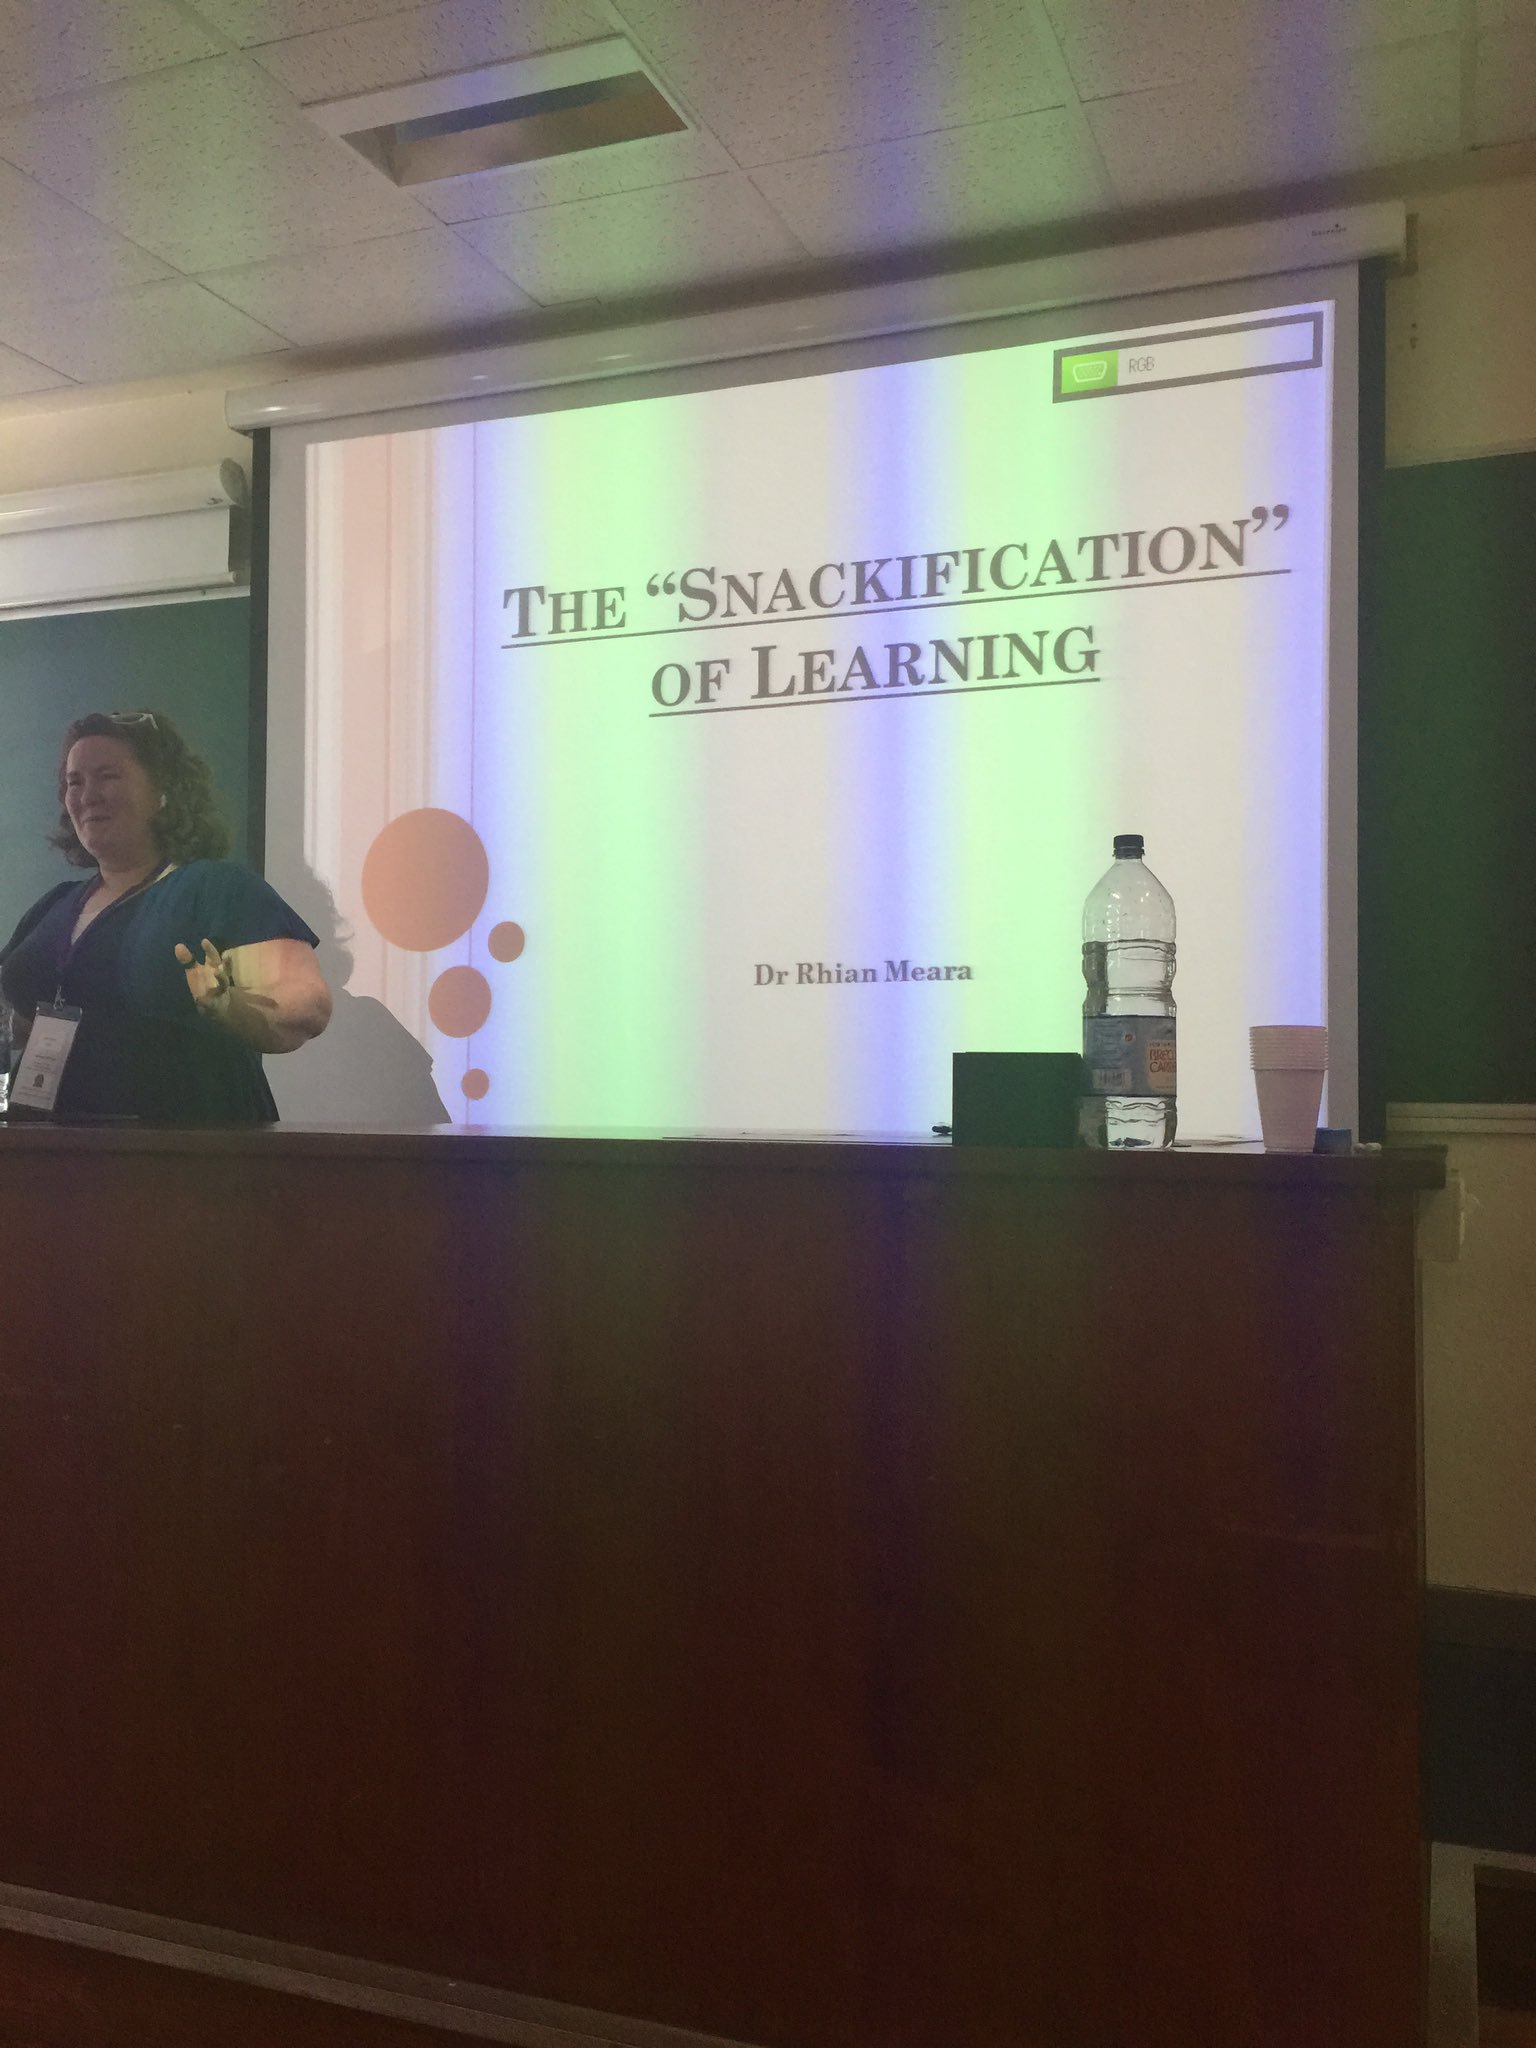 A fun and interesting presentation by @RhianMeara on the snackification of  learning #SUSALT17 https://t.co/ebvYKpxl12